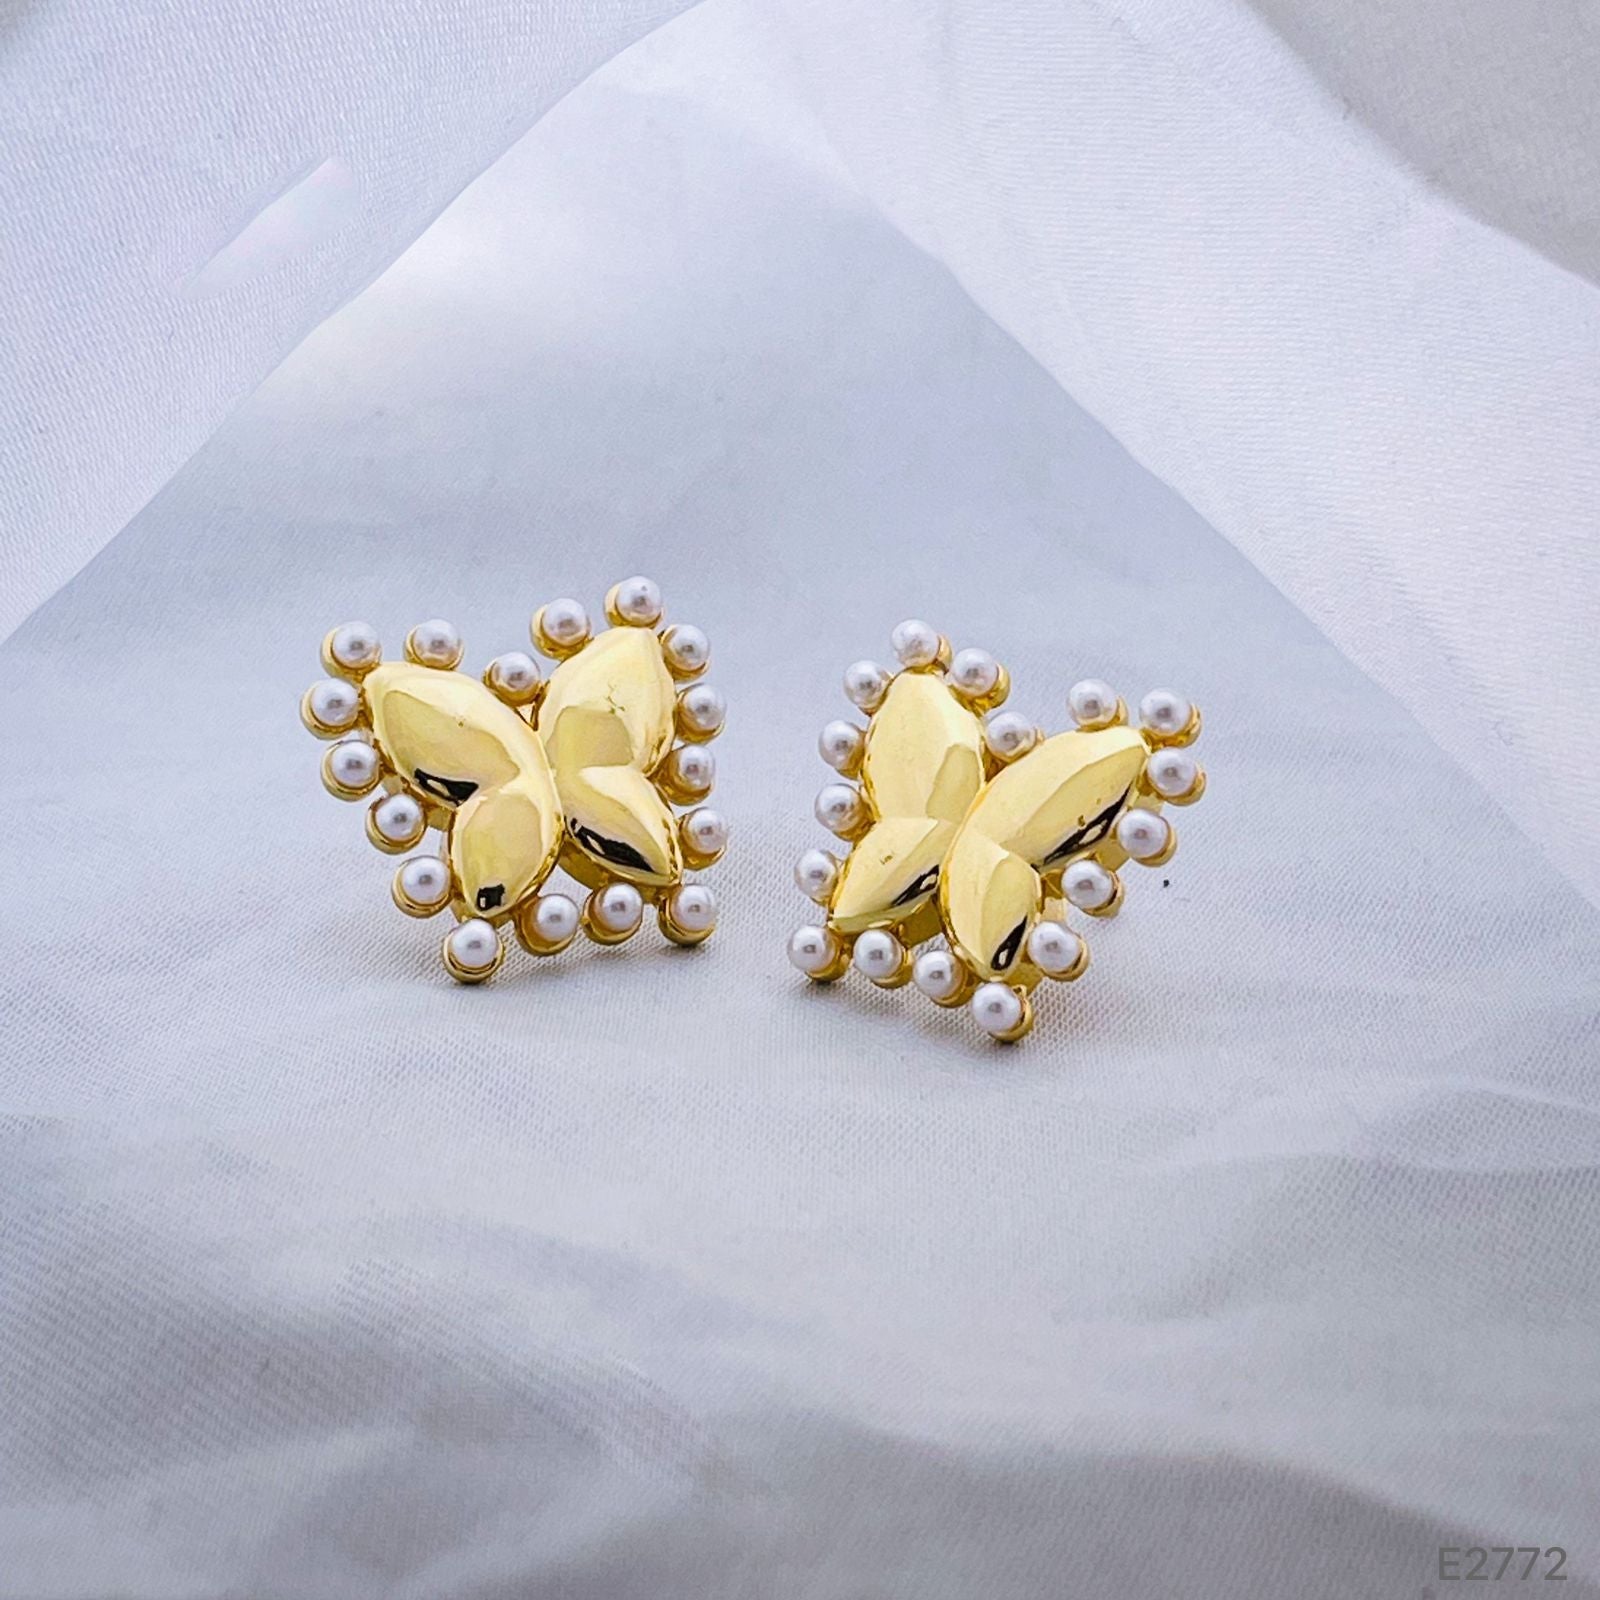 Try the latest design of small earrings